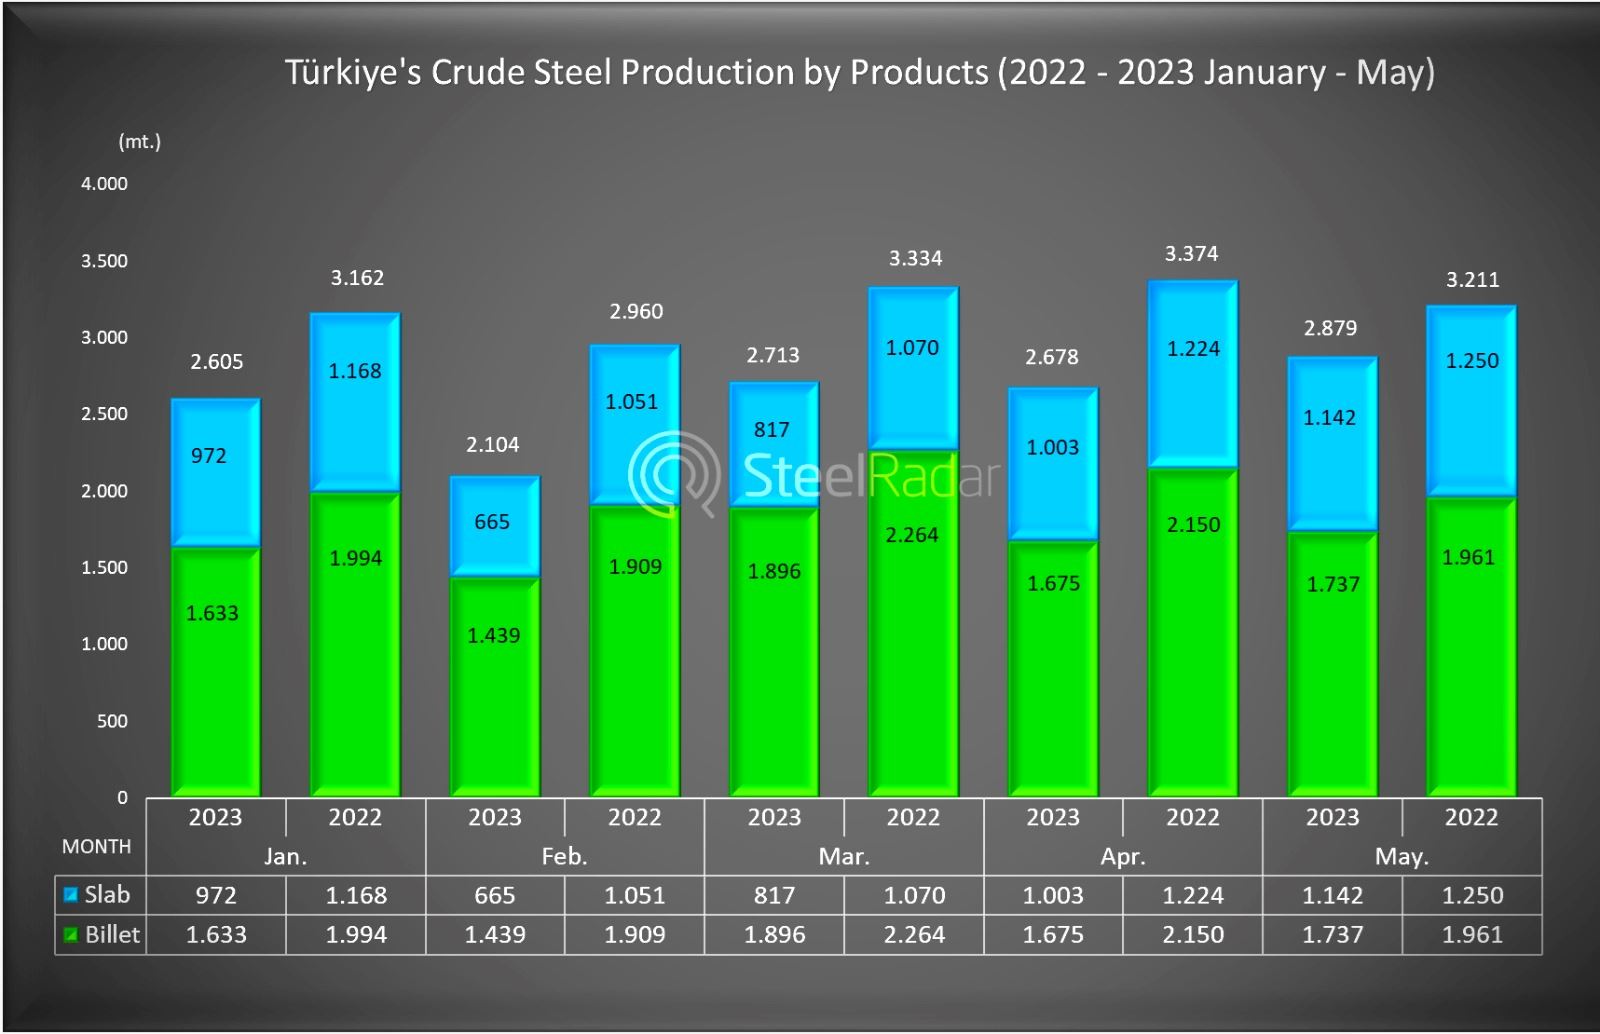 In the January - May period, Turkey's crude steel production by products (billet and slab) decreased by 19%